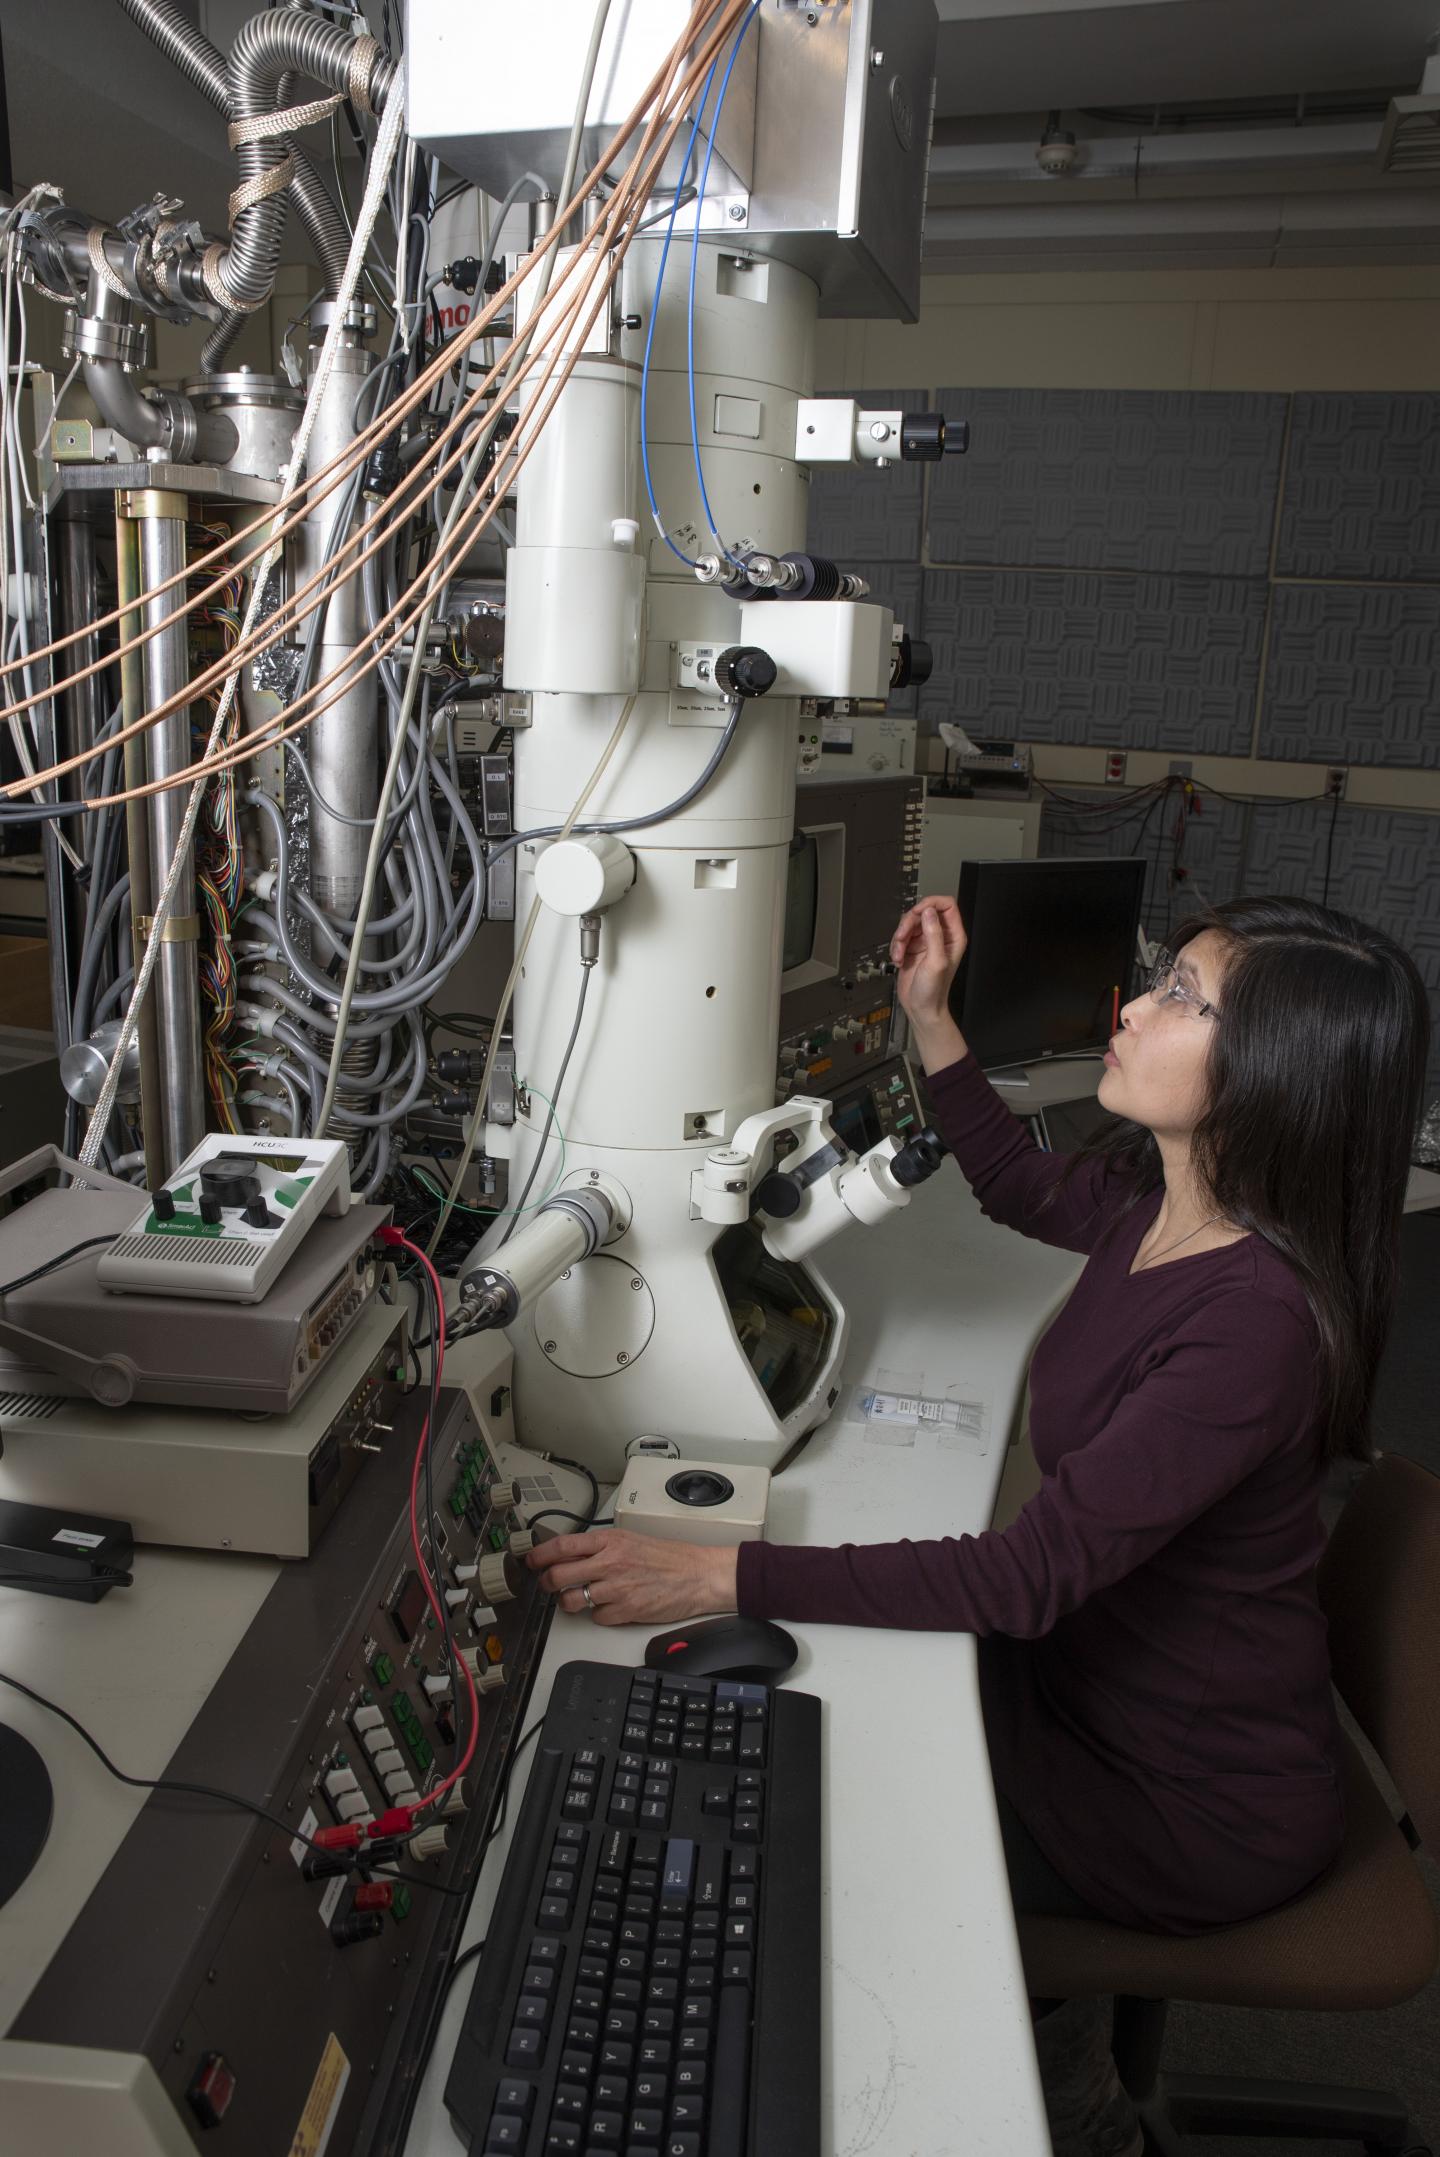 Retrofitted Electron Microscope for Making High-Speed Atom-Scale Movies